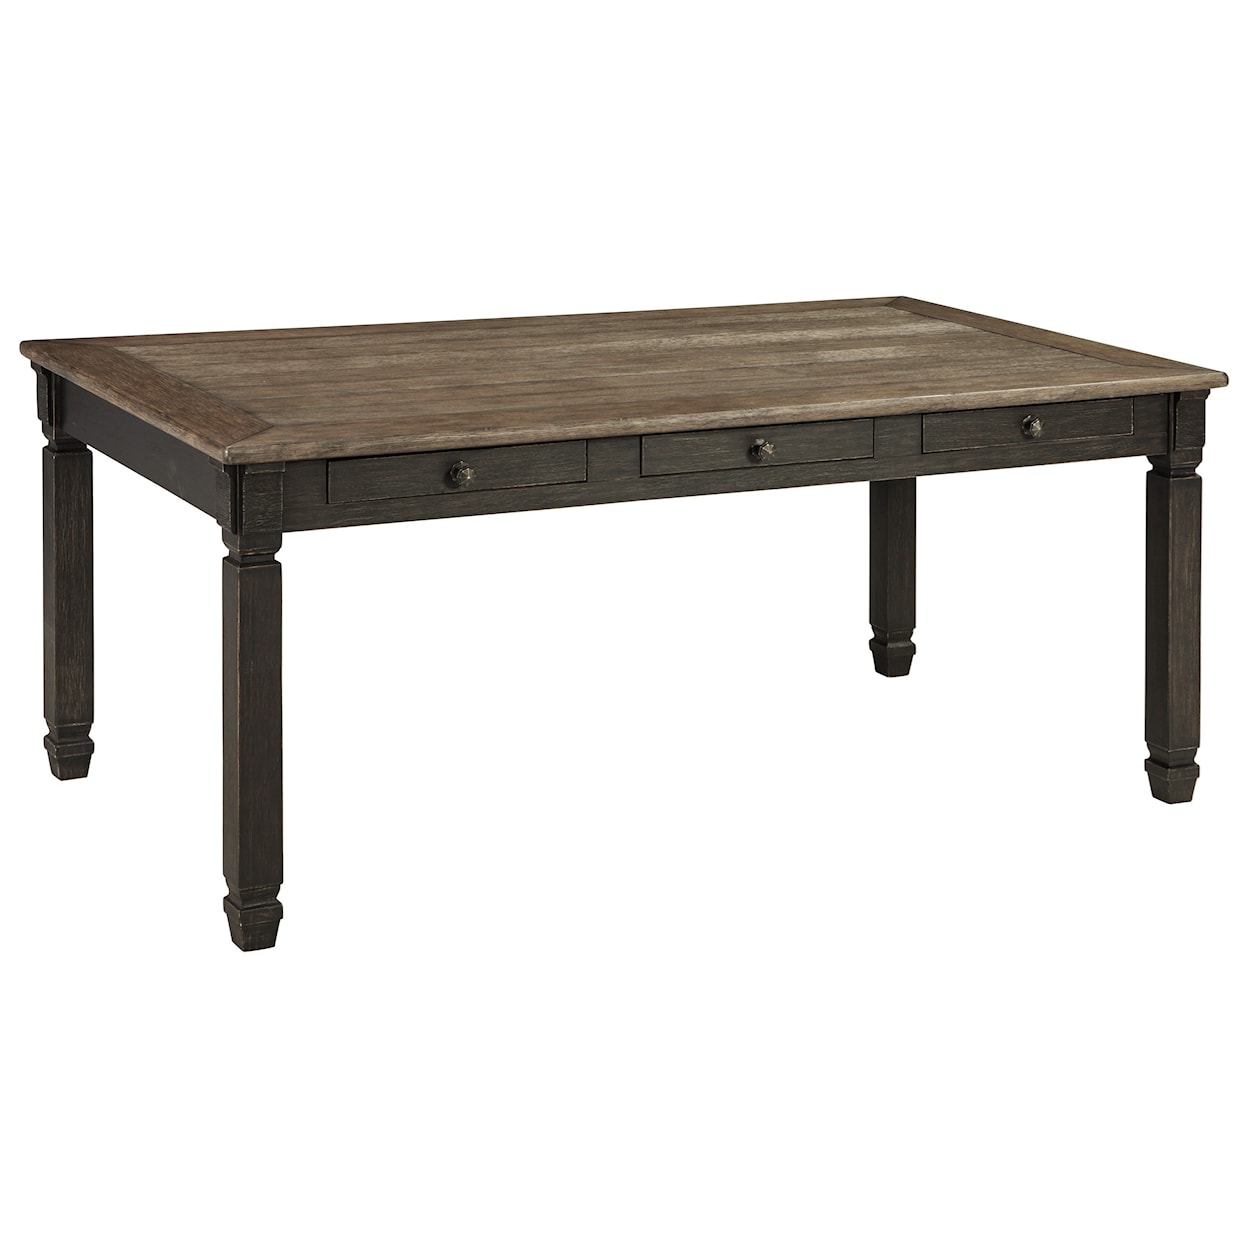 Signature Design by Ashley Furniture Tyler Creek Rectangular Dining Room Table